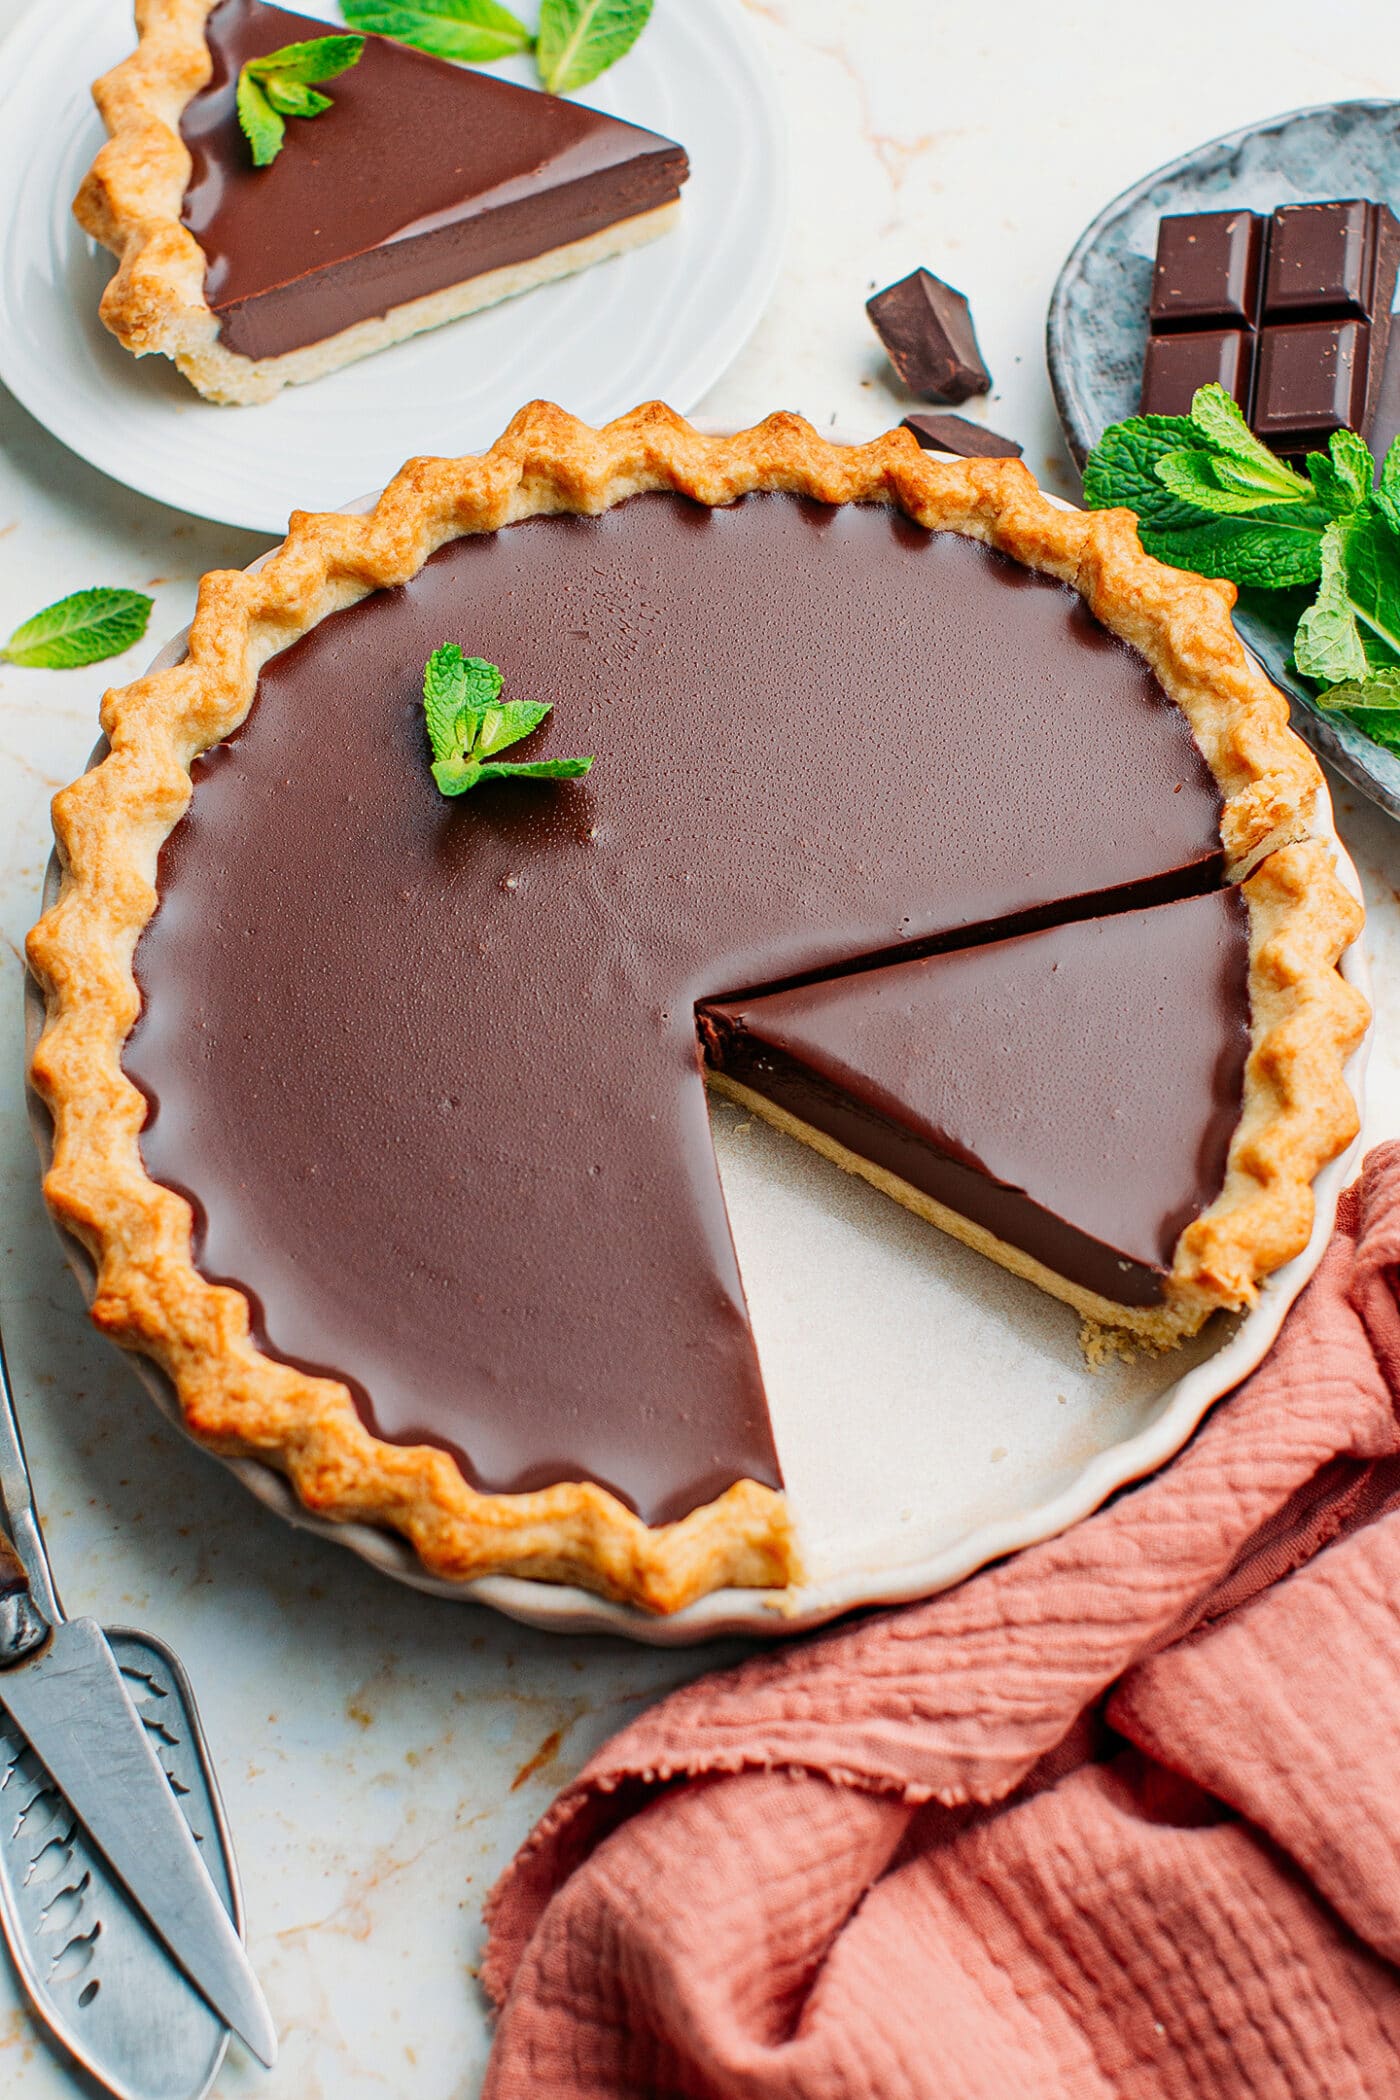 Chocolate ganache tart topped with mint leaves.